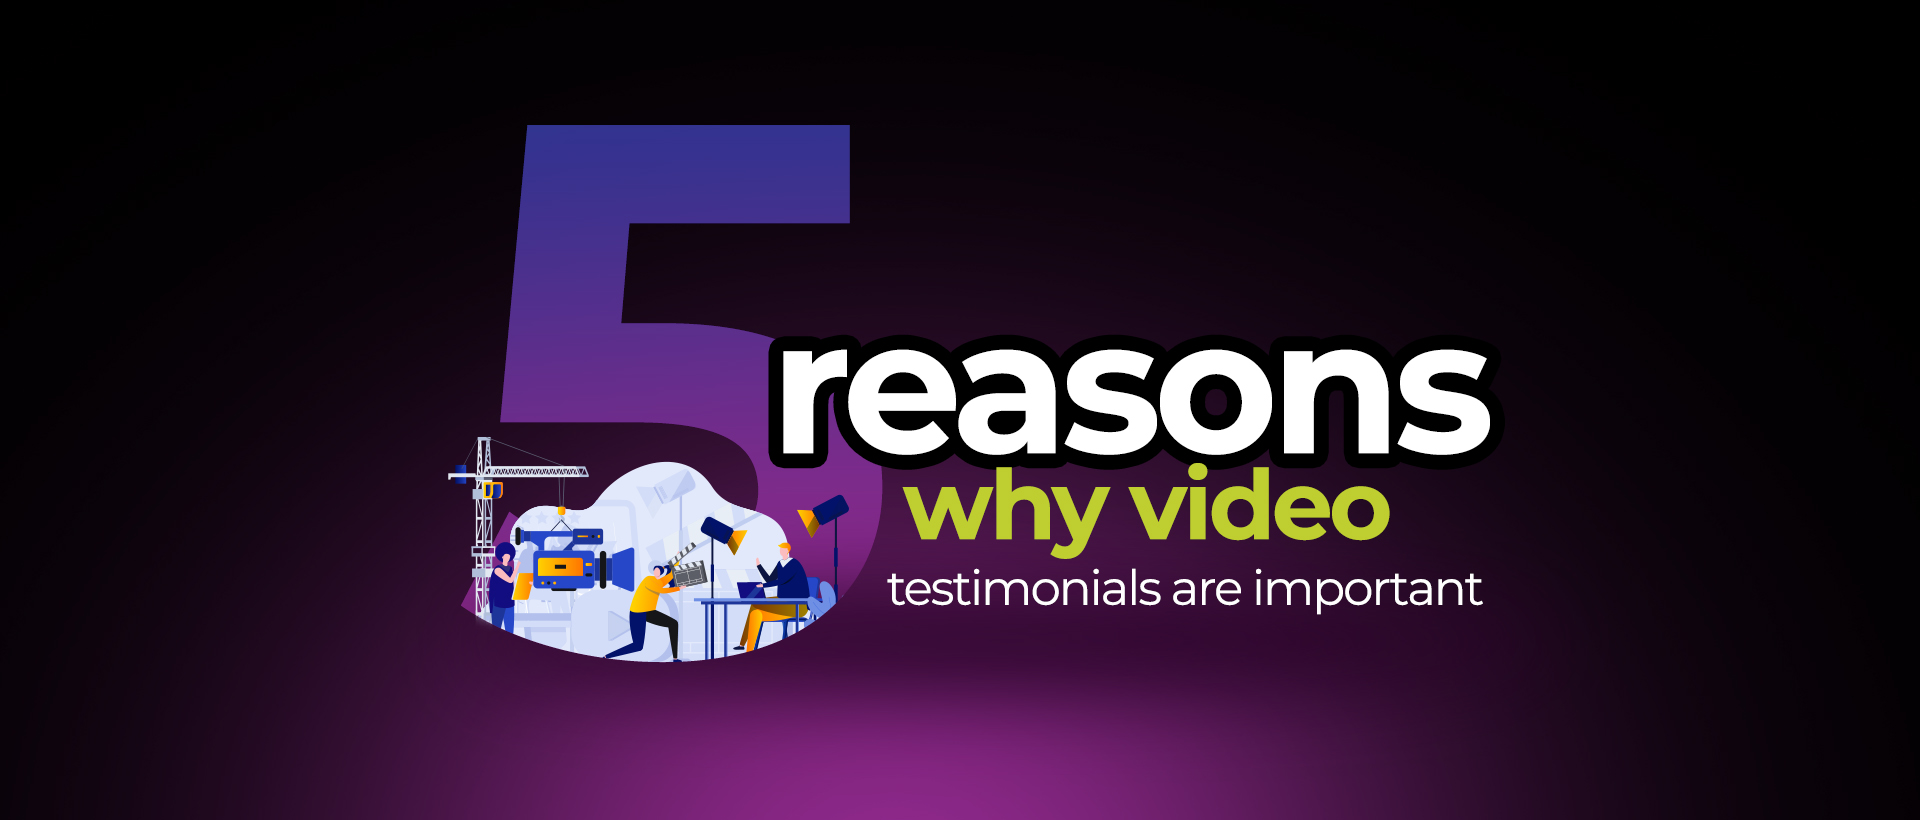 5 Reasons Why Video Testimonials are Important